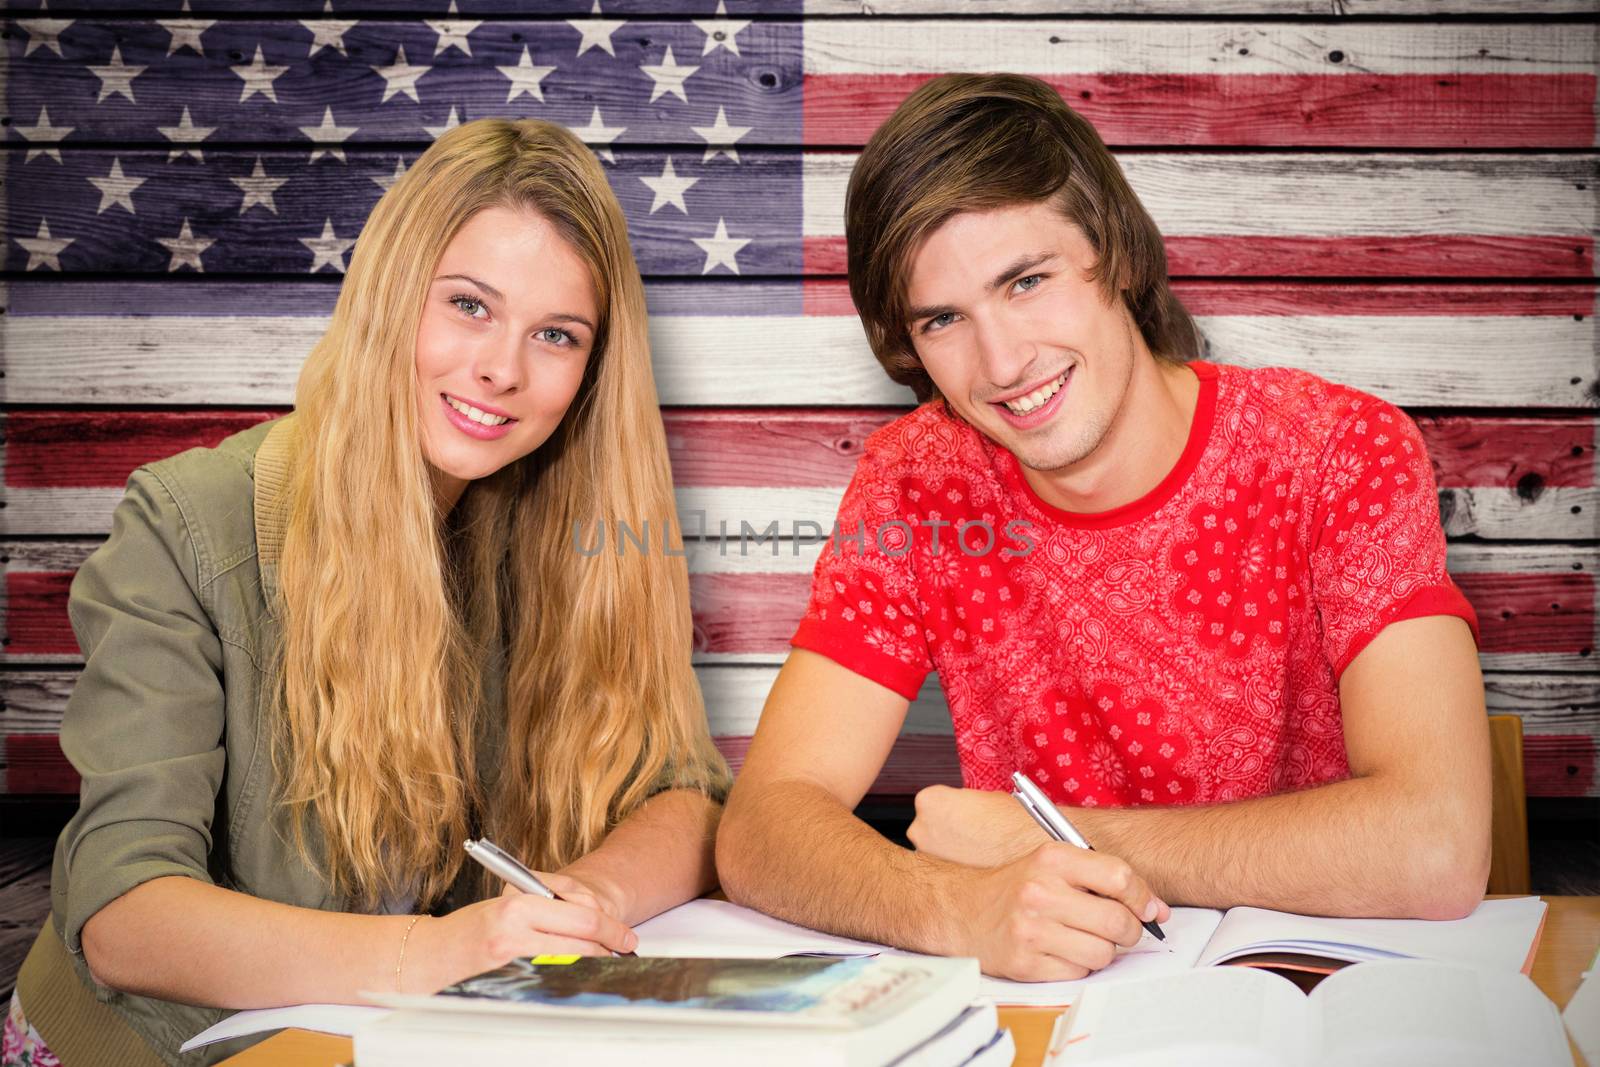 Students studying against composite image of usa national flag